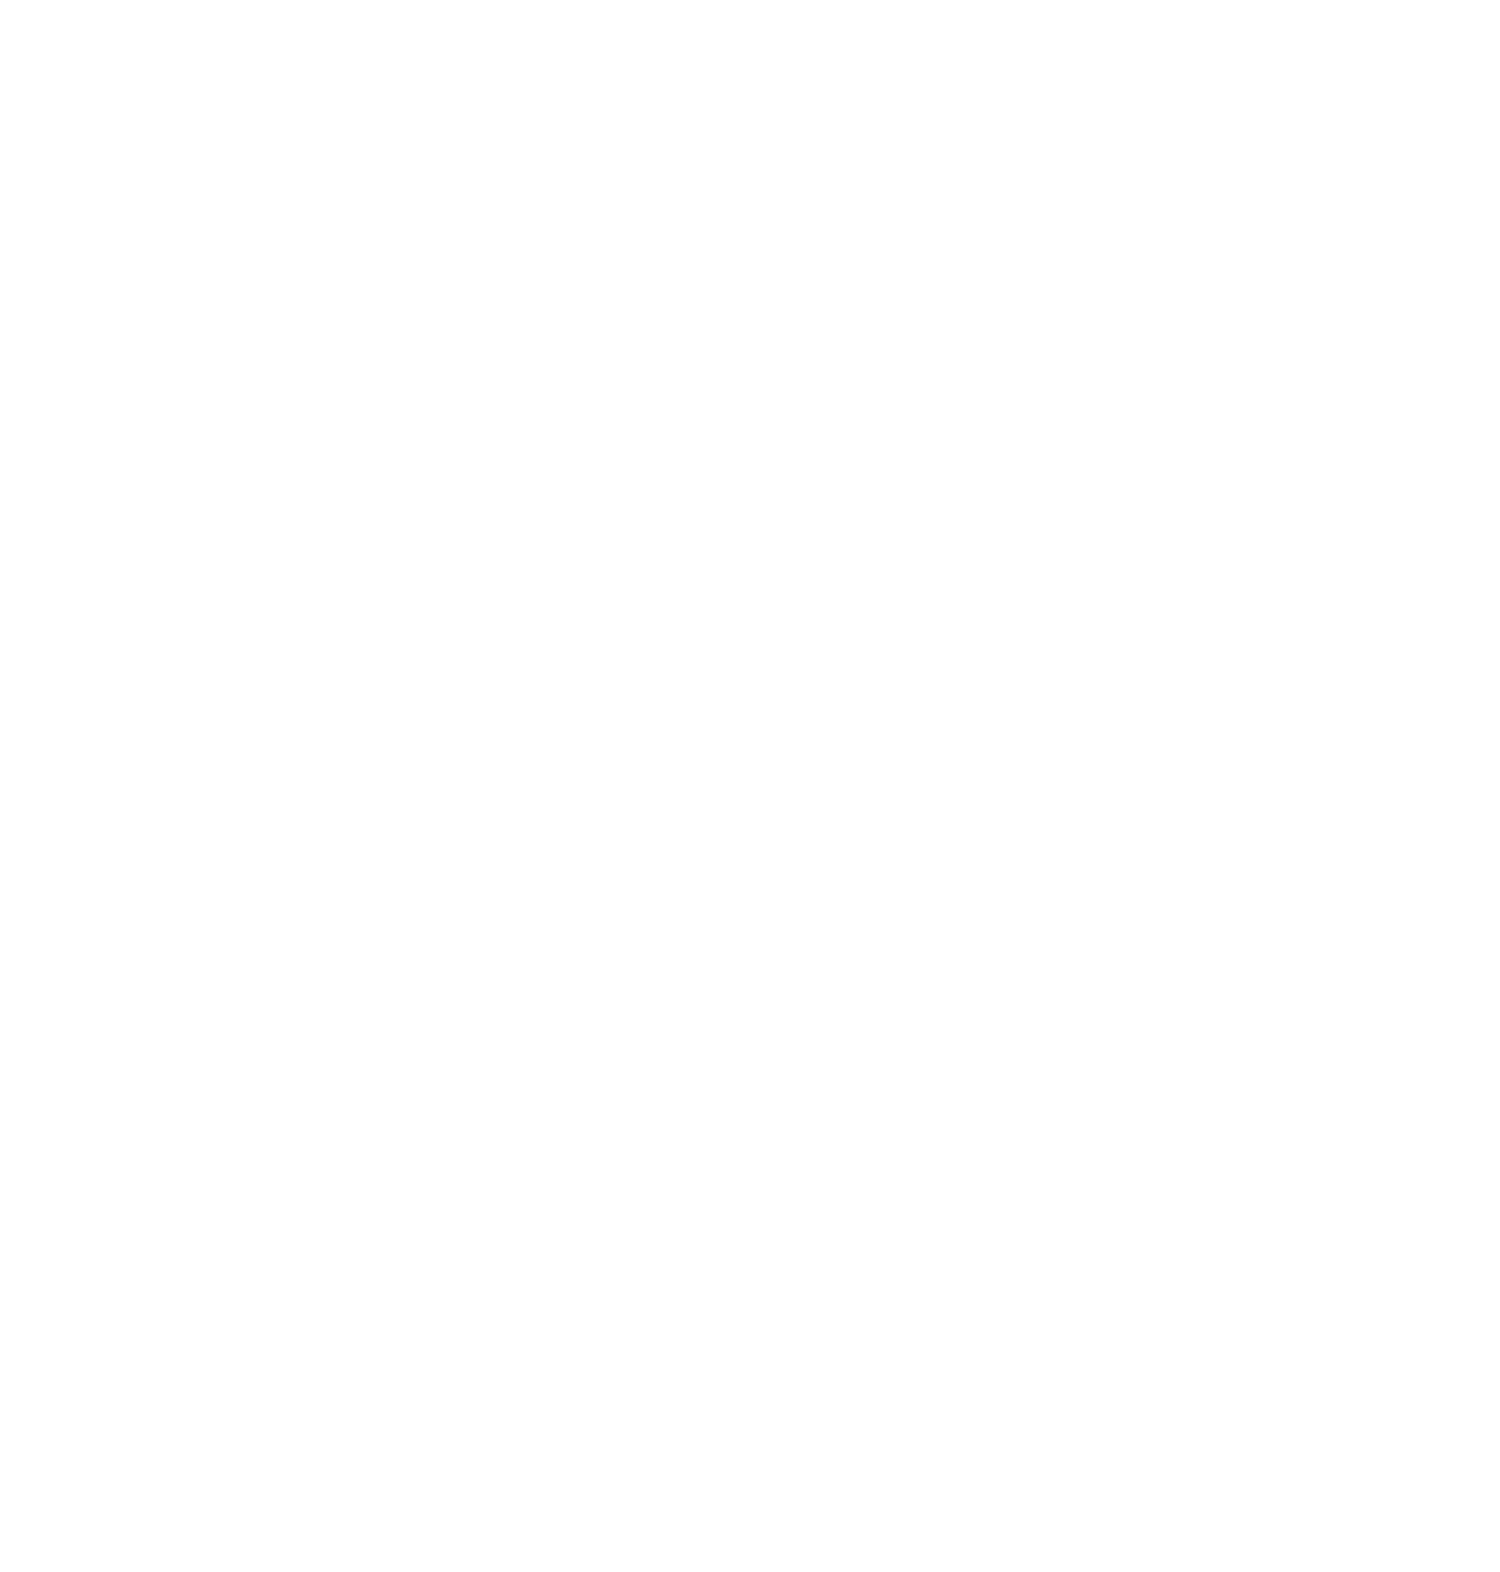 Distraction Brewing Company